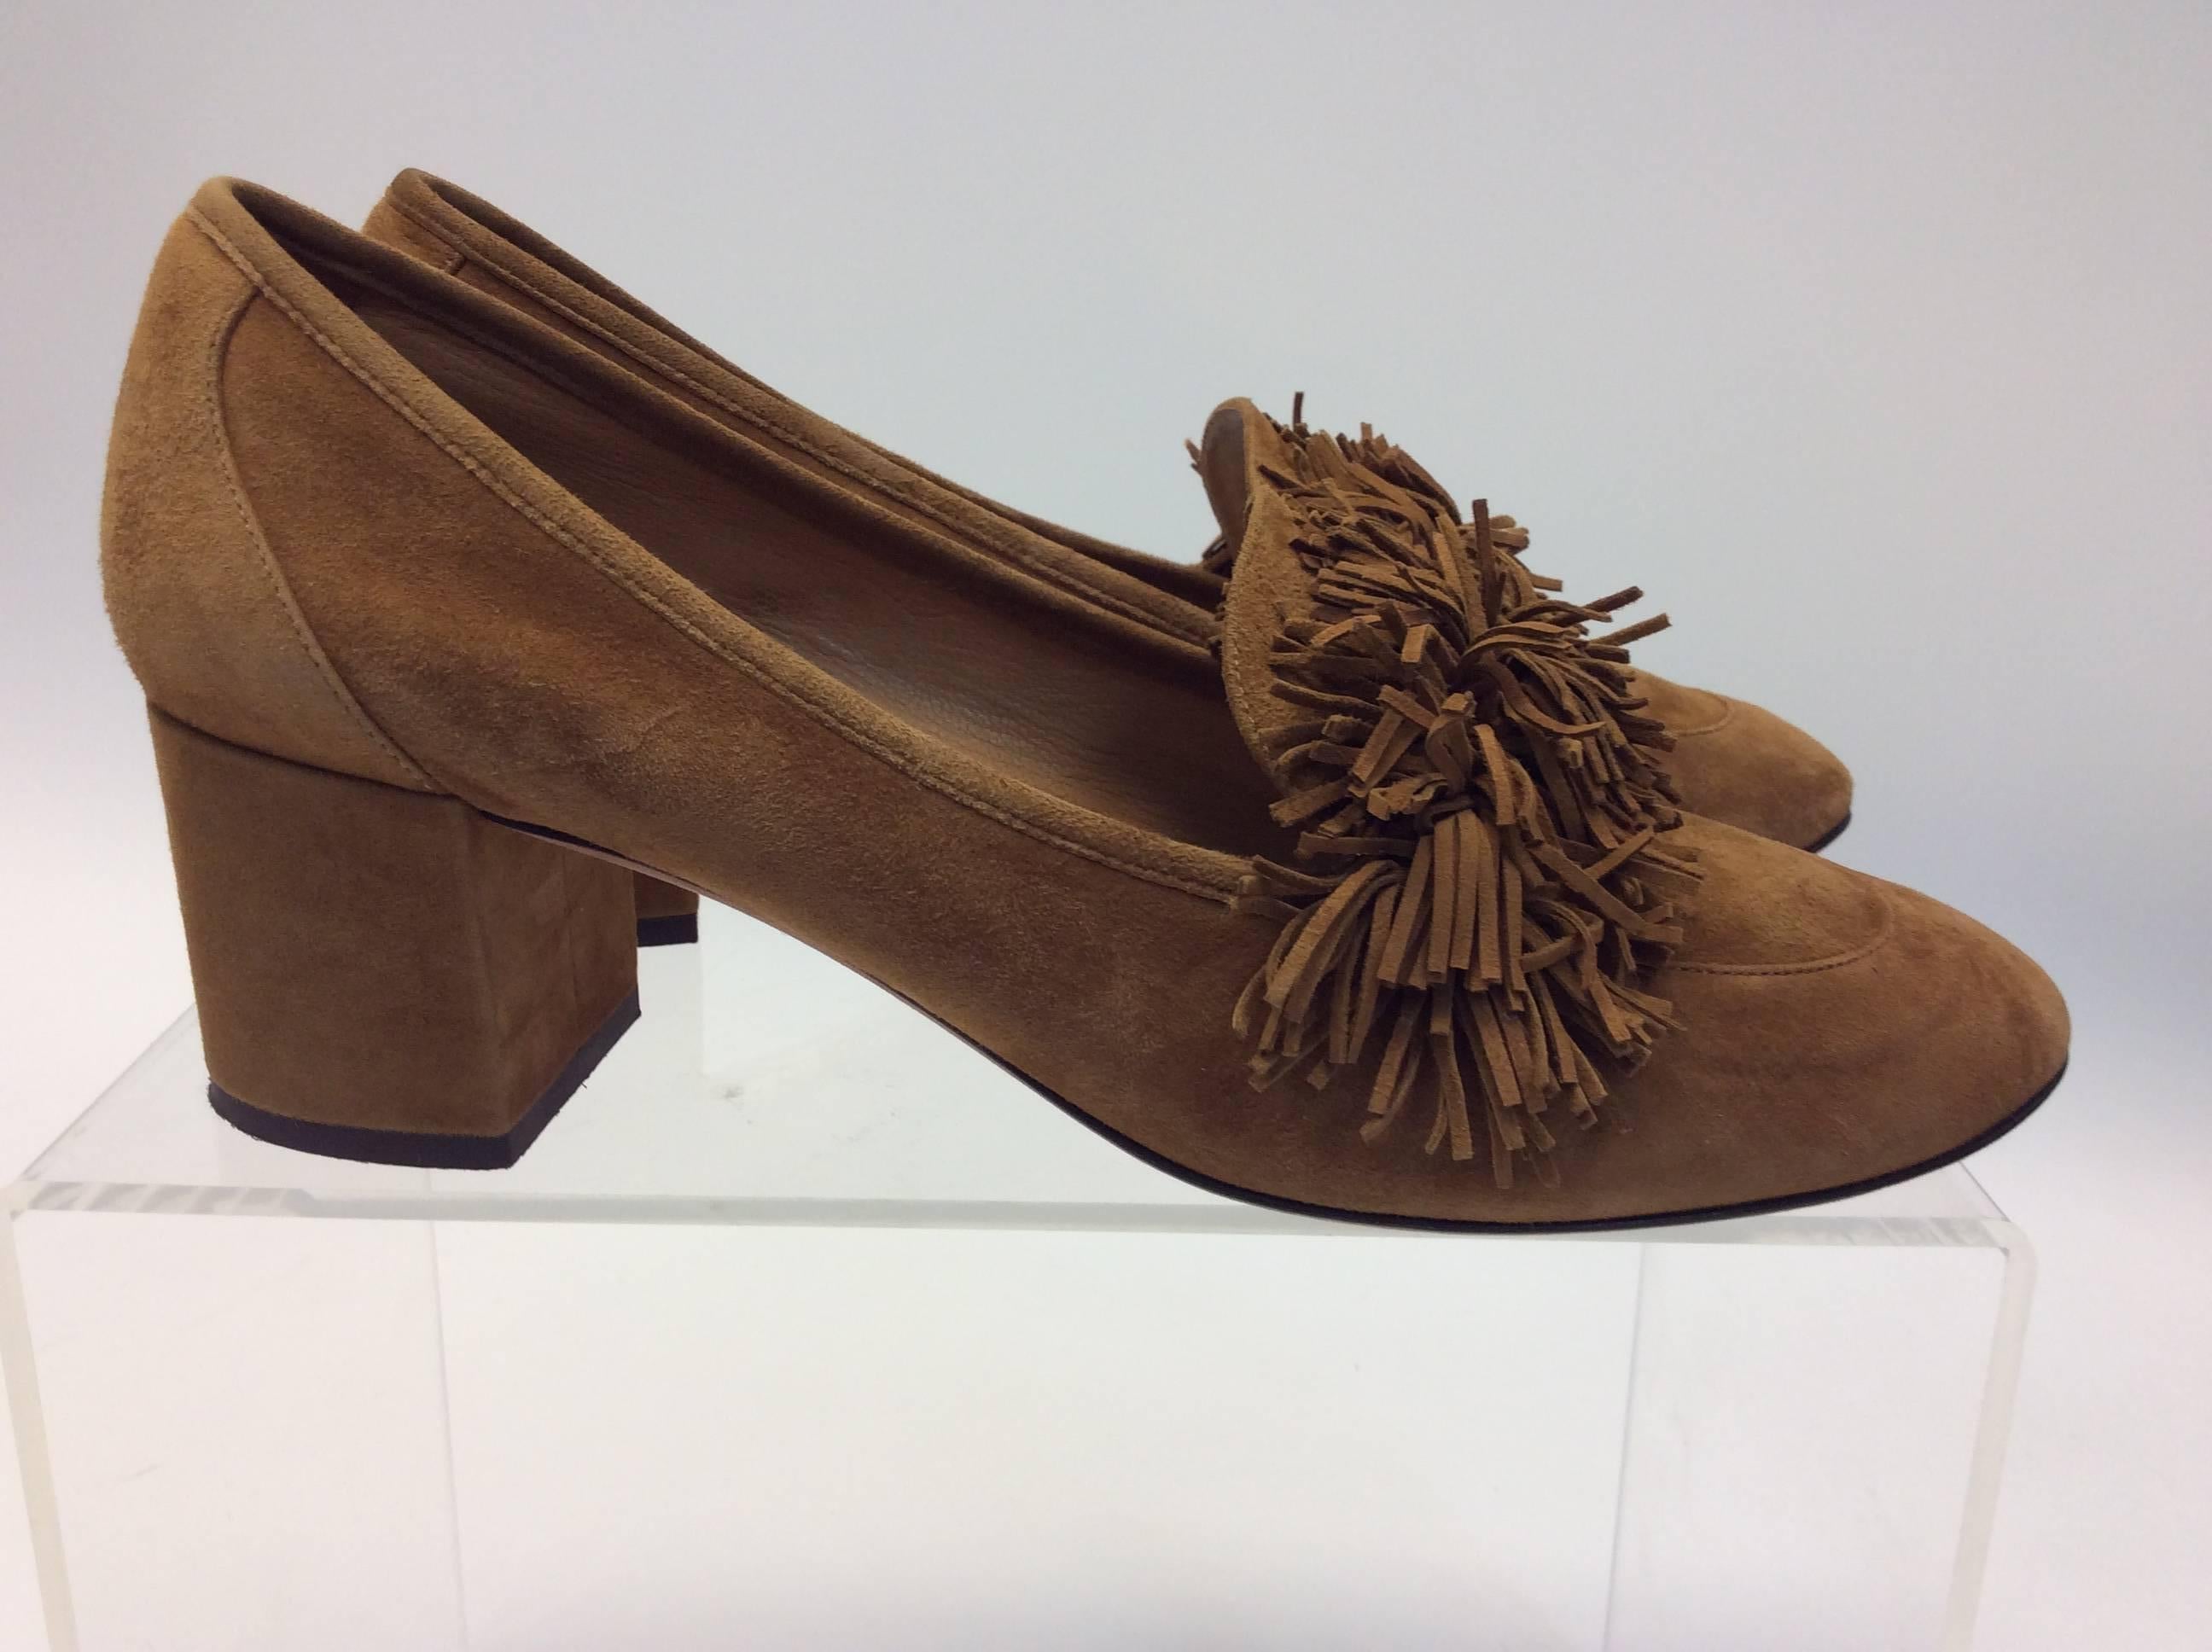 Aquazzura Camel Fringe Suede Loafer  In Excellent Condition For Sale In Narberth, PA